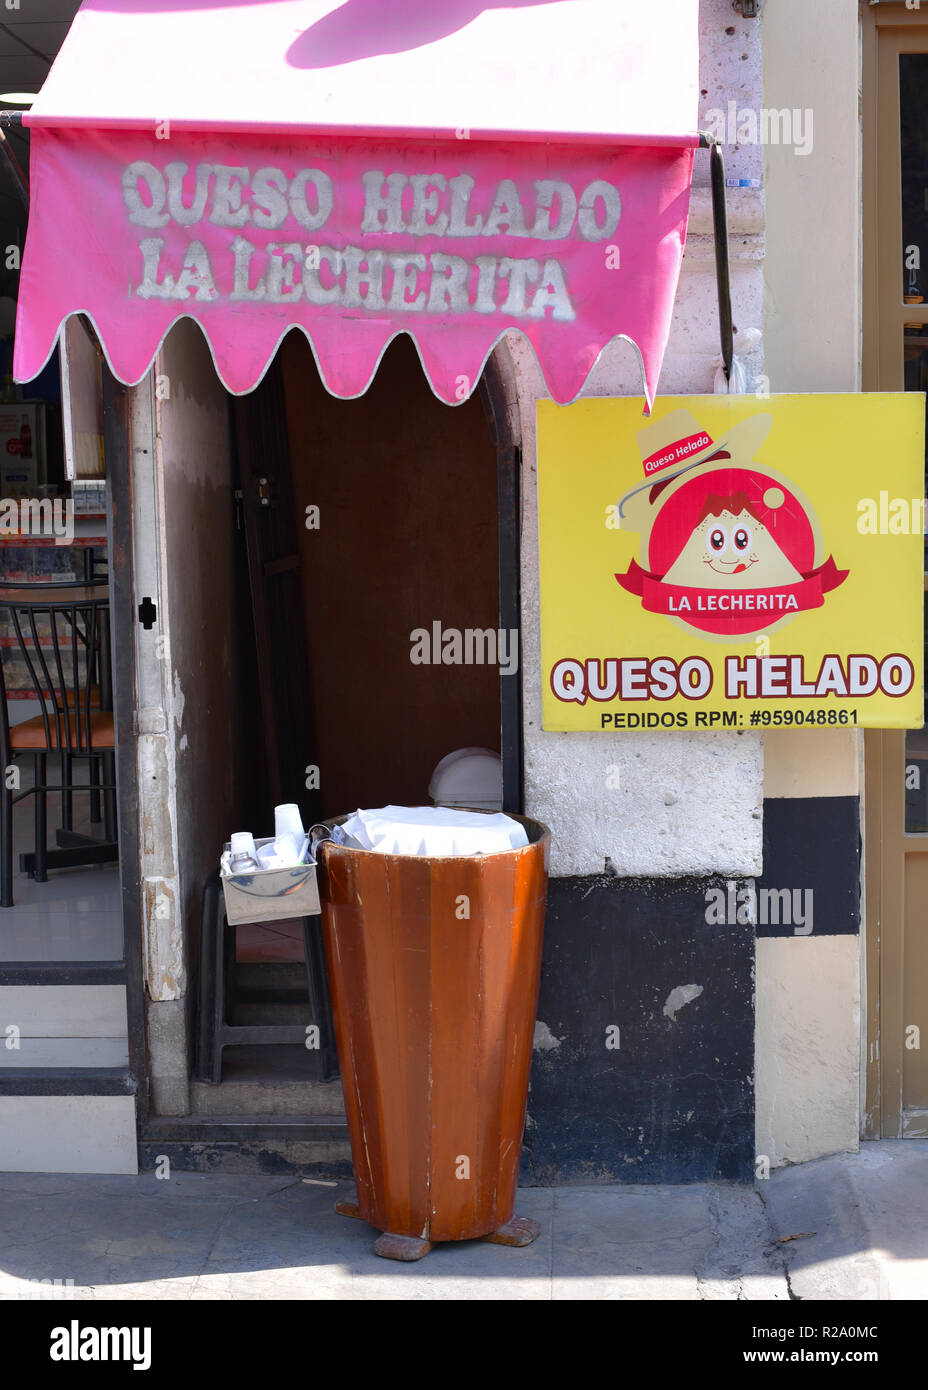 A stall selling Queso Helado, a traditional ice cream snack in Arequipa, Peru Stock Photo